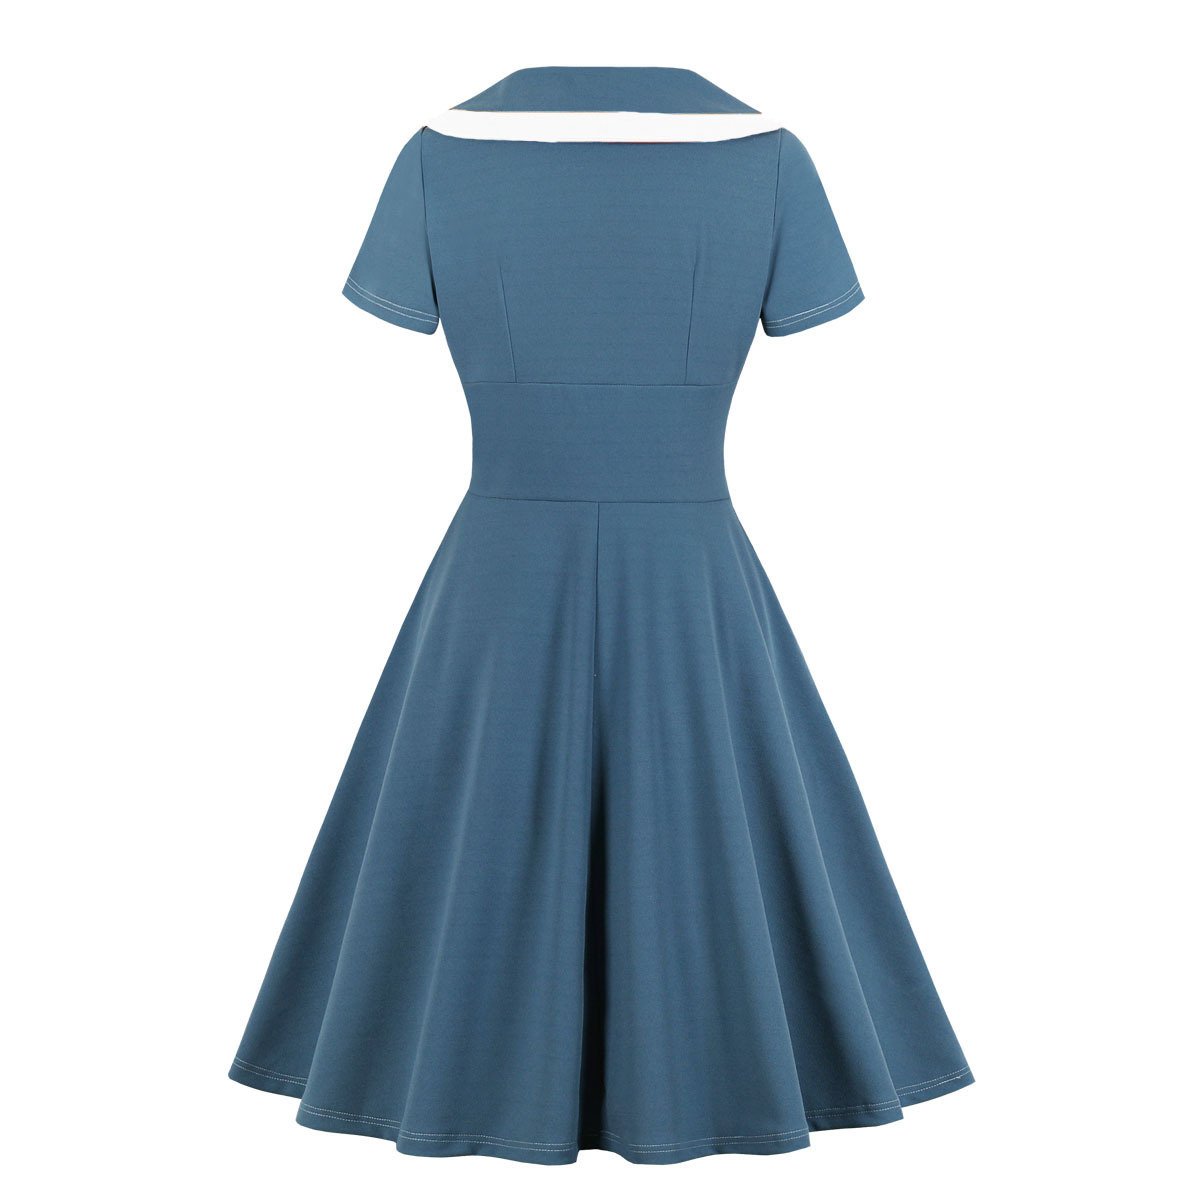 Women Constract Color V Neck Vintage Dresses-STYLEGOING